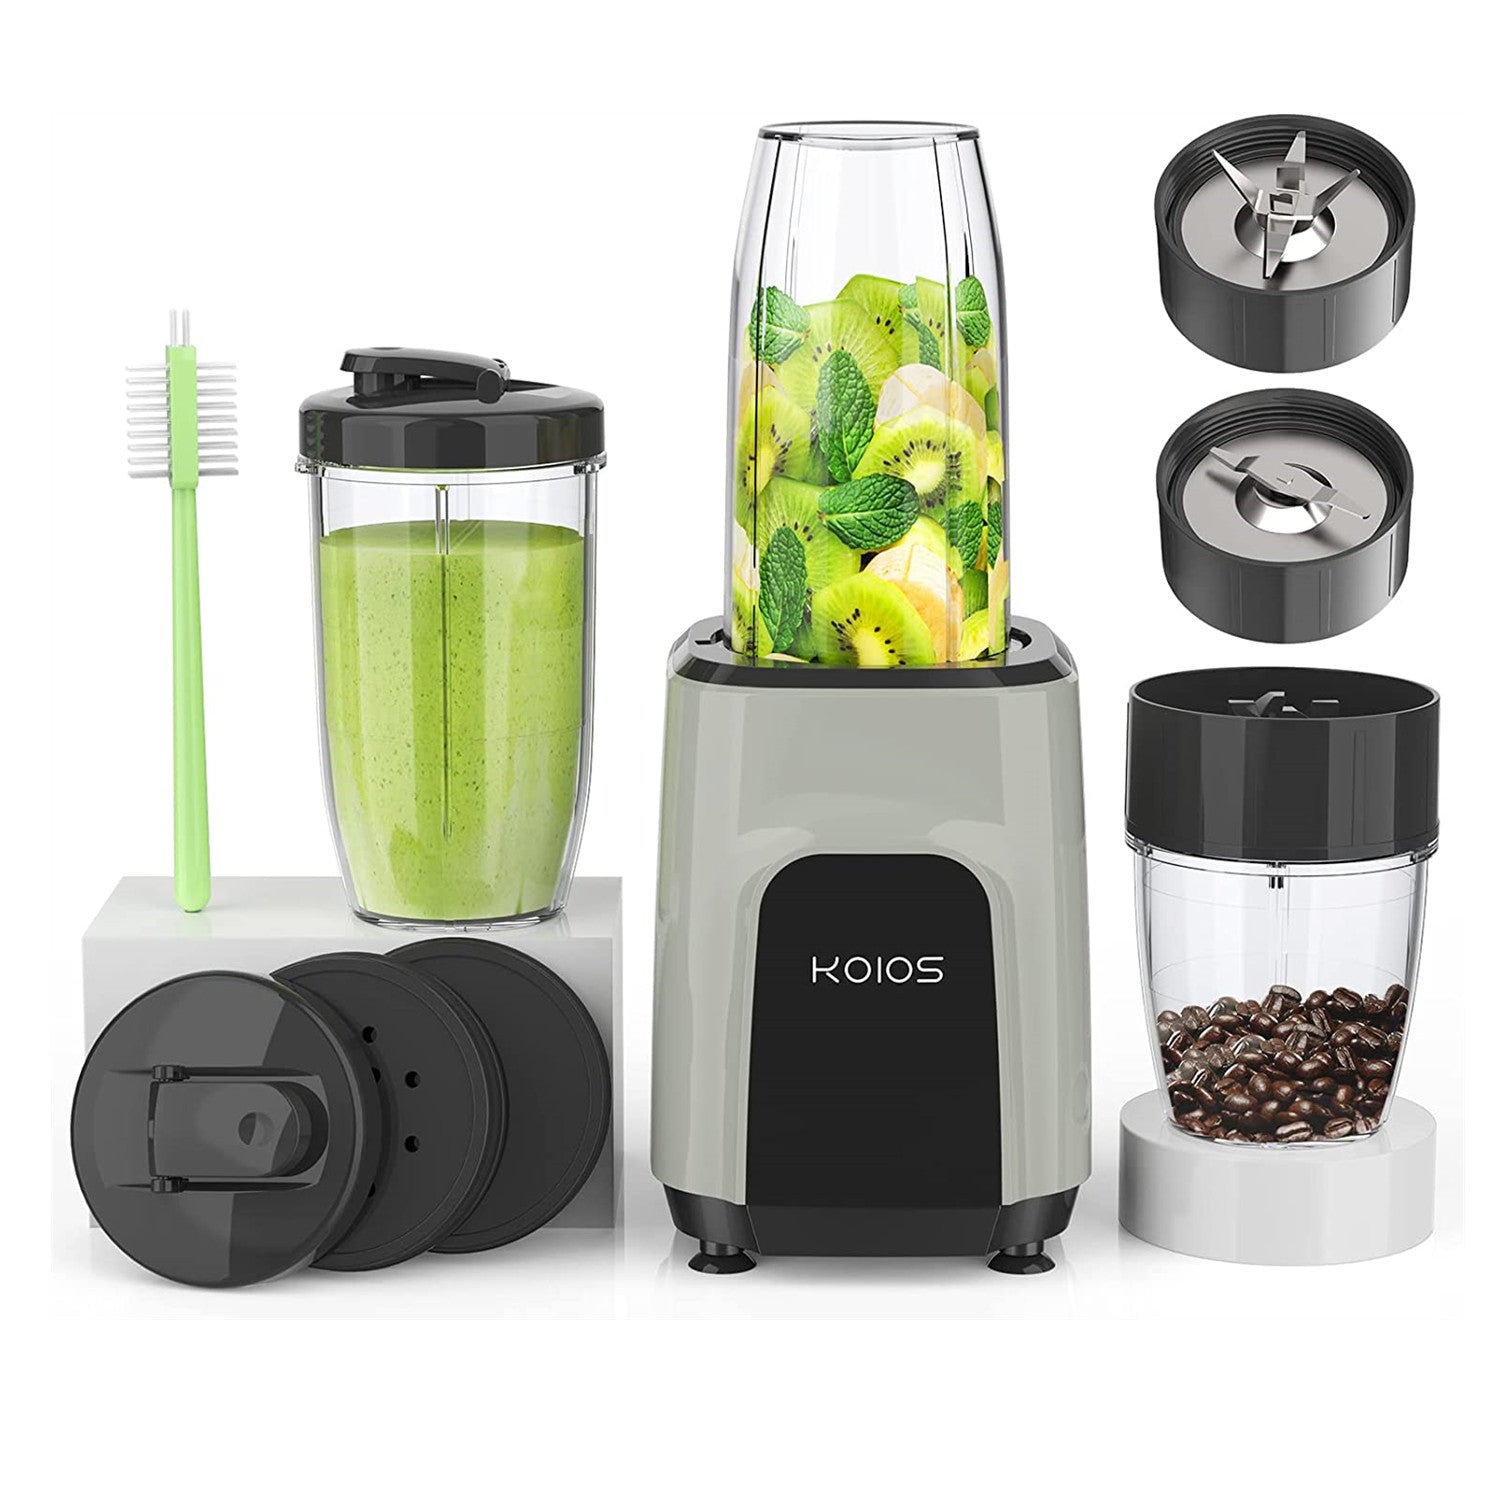 Zokop Electric Personal Blender with Three Speeds, Mini Blenders with 2*600ml Plastic, Black